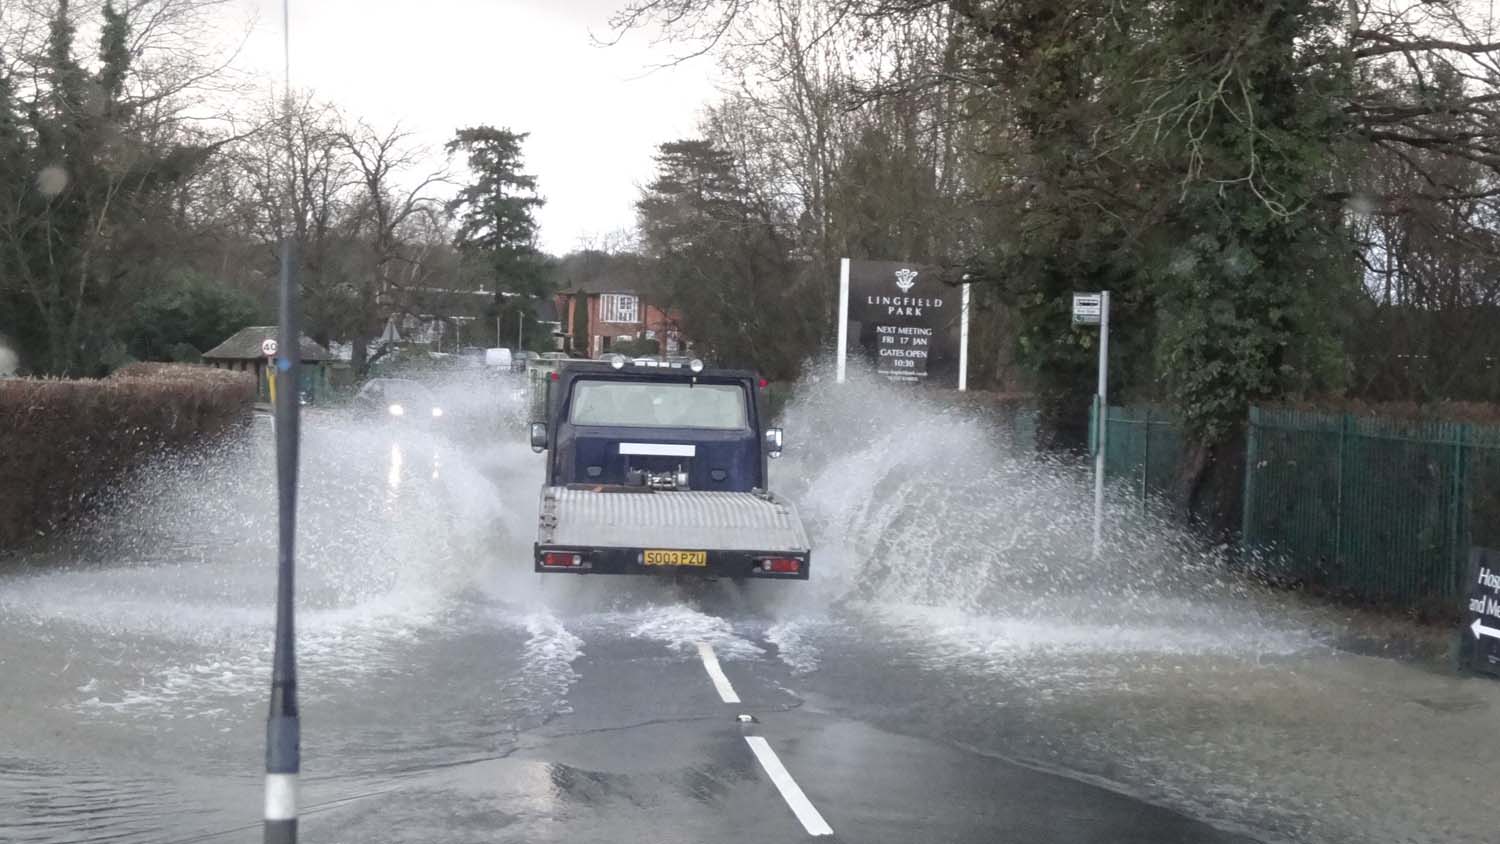 the UK was very wet that year